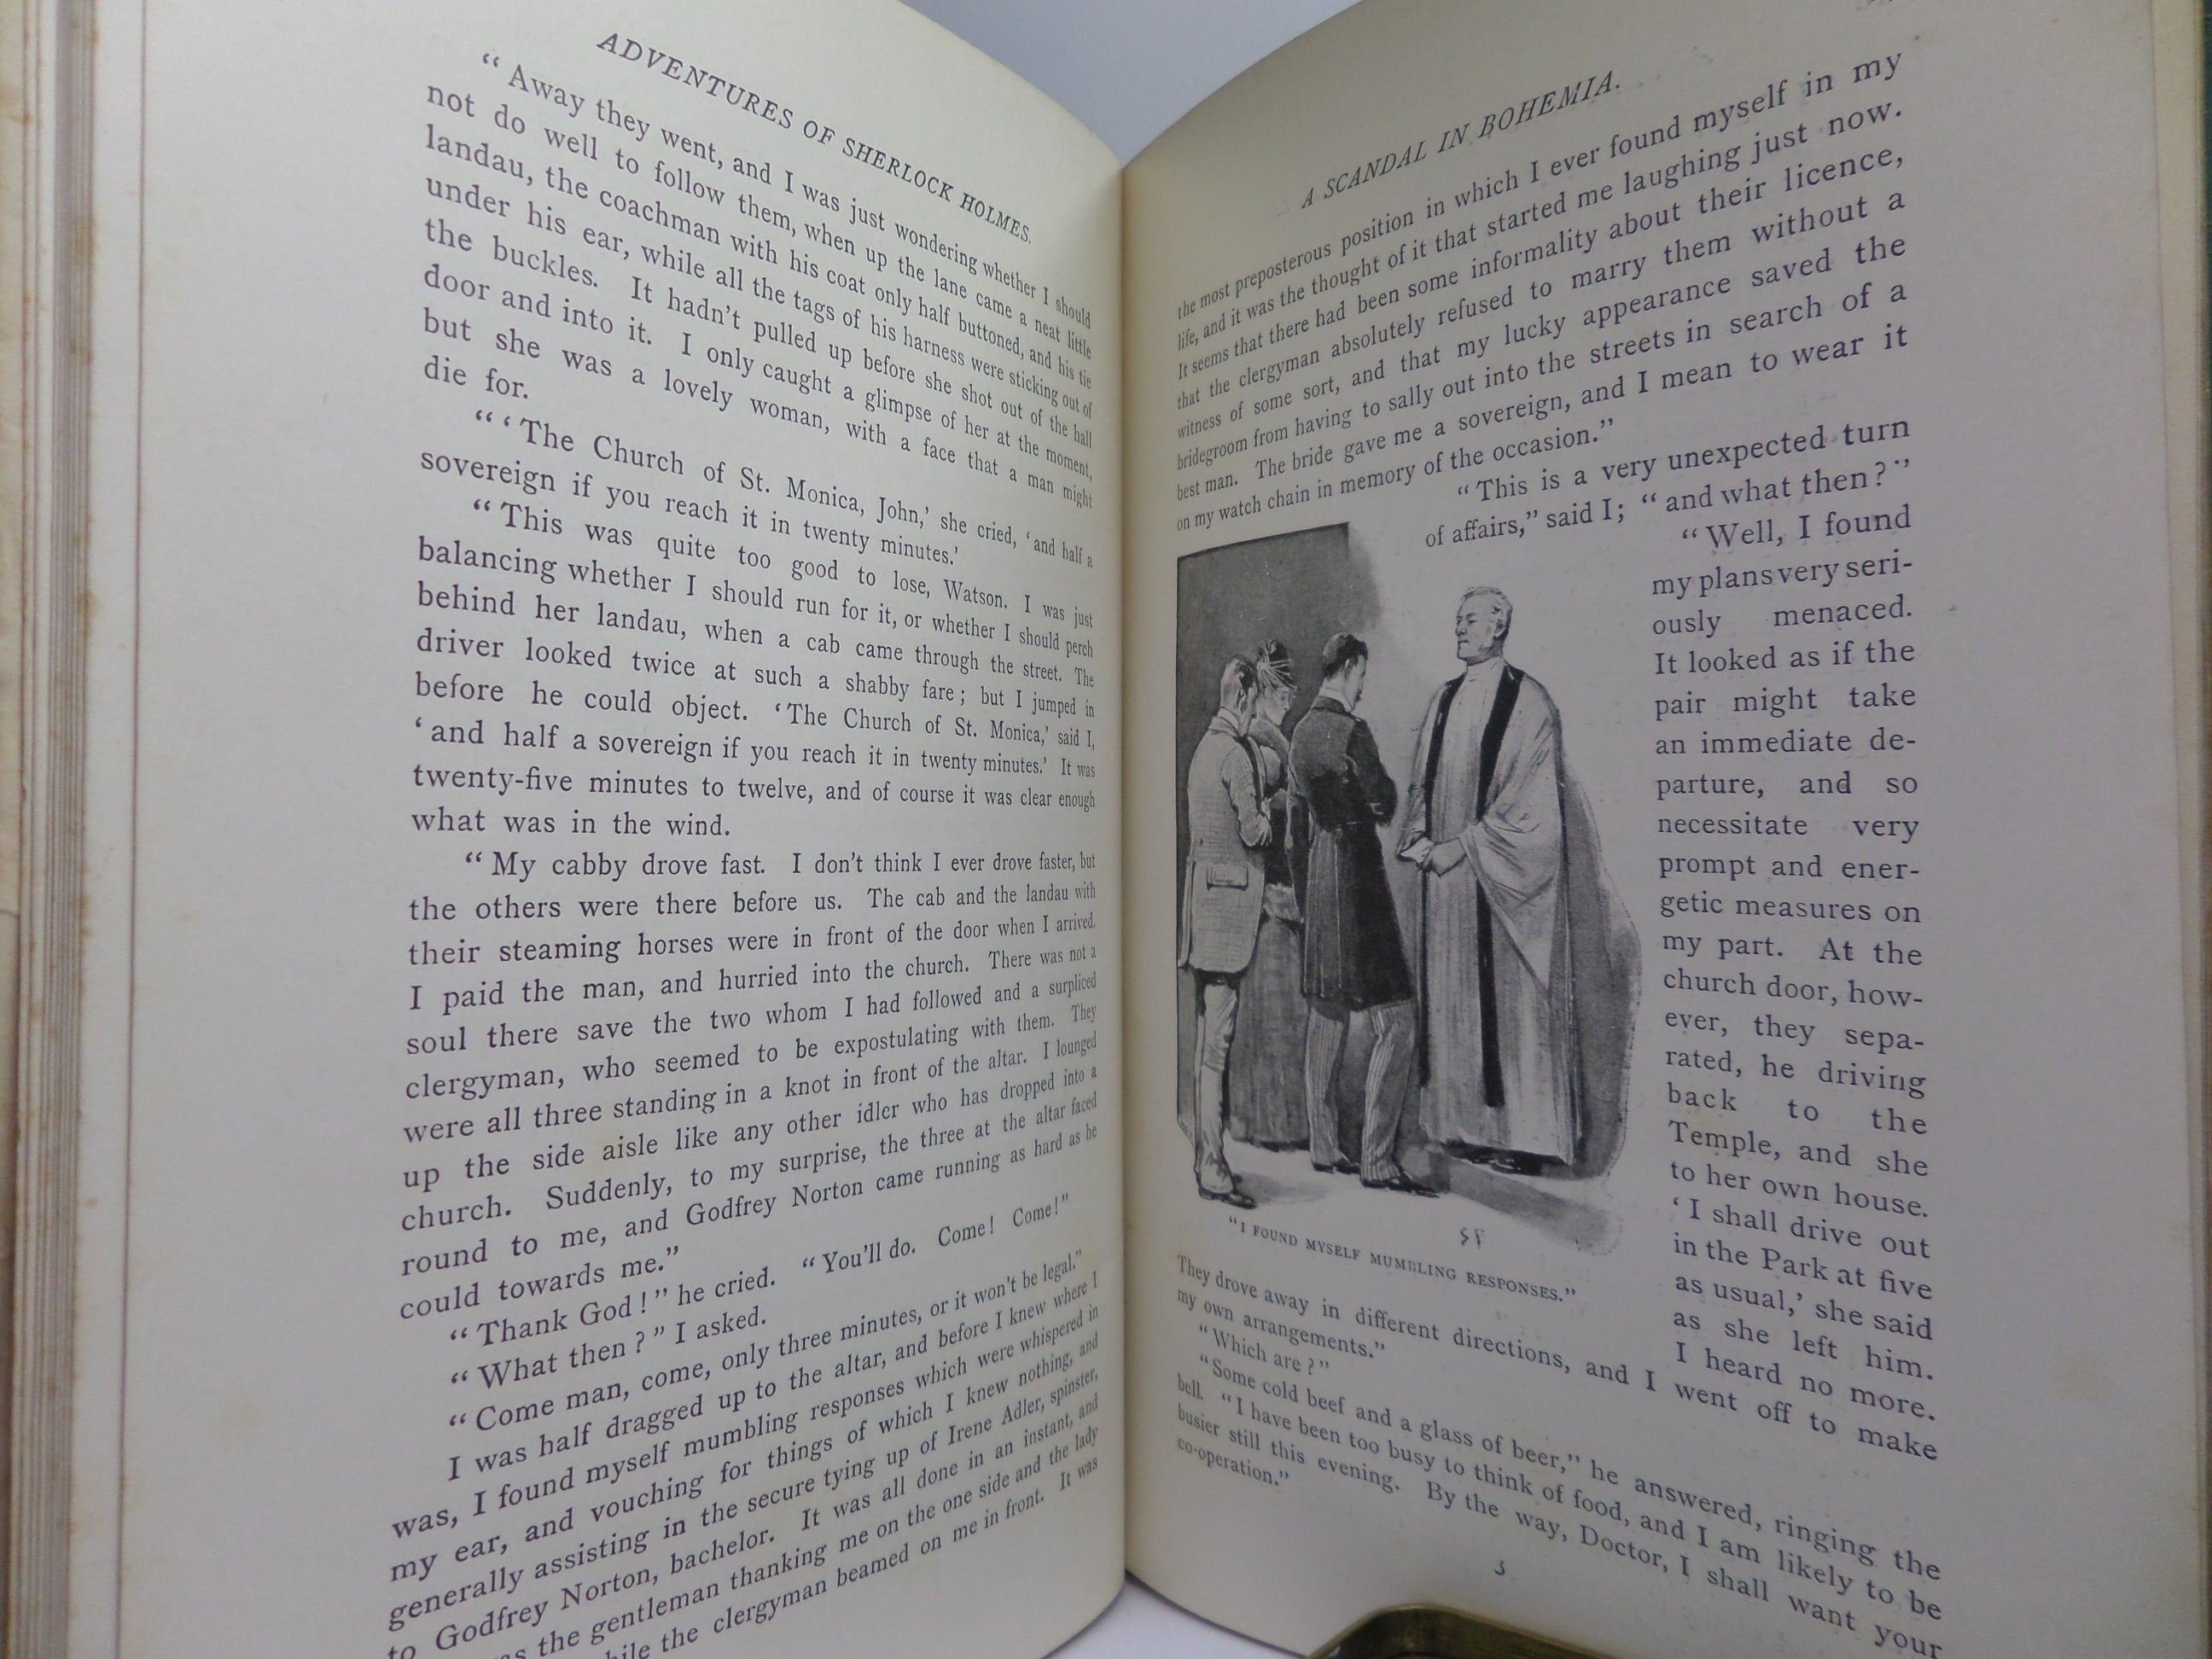 THE ADVENTURES OF SHERLOCK HOLMES BY ARTHUR CONAN DOYLE 1892 FIRST EDITION, FIRST ISSUE